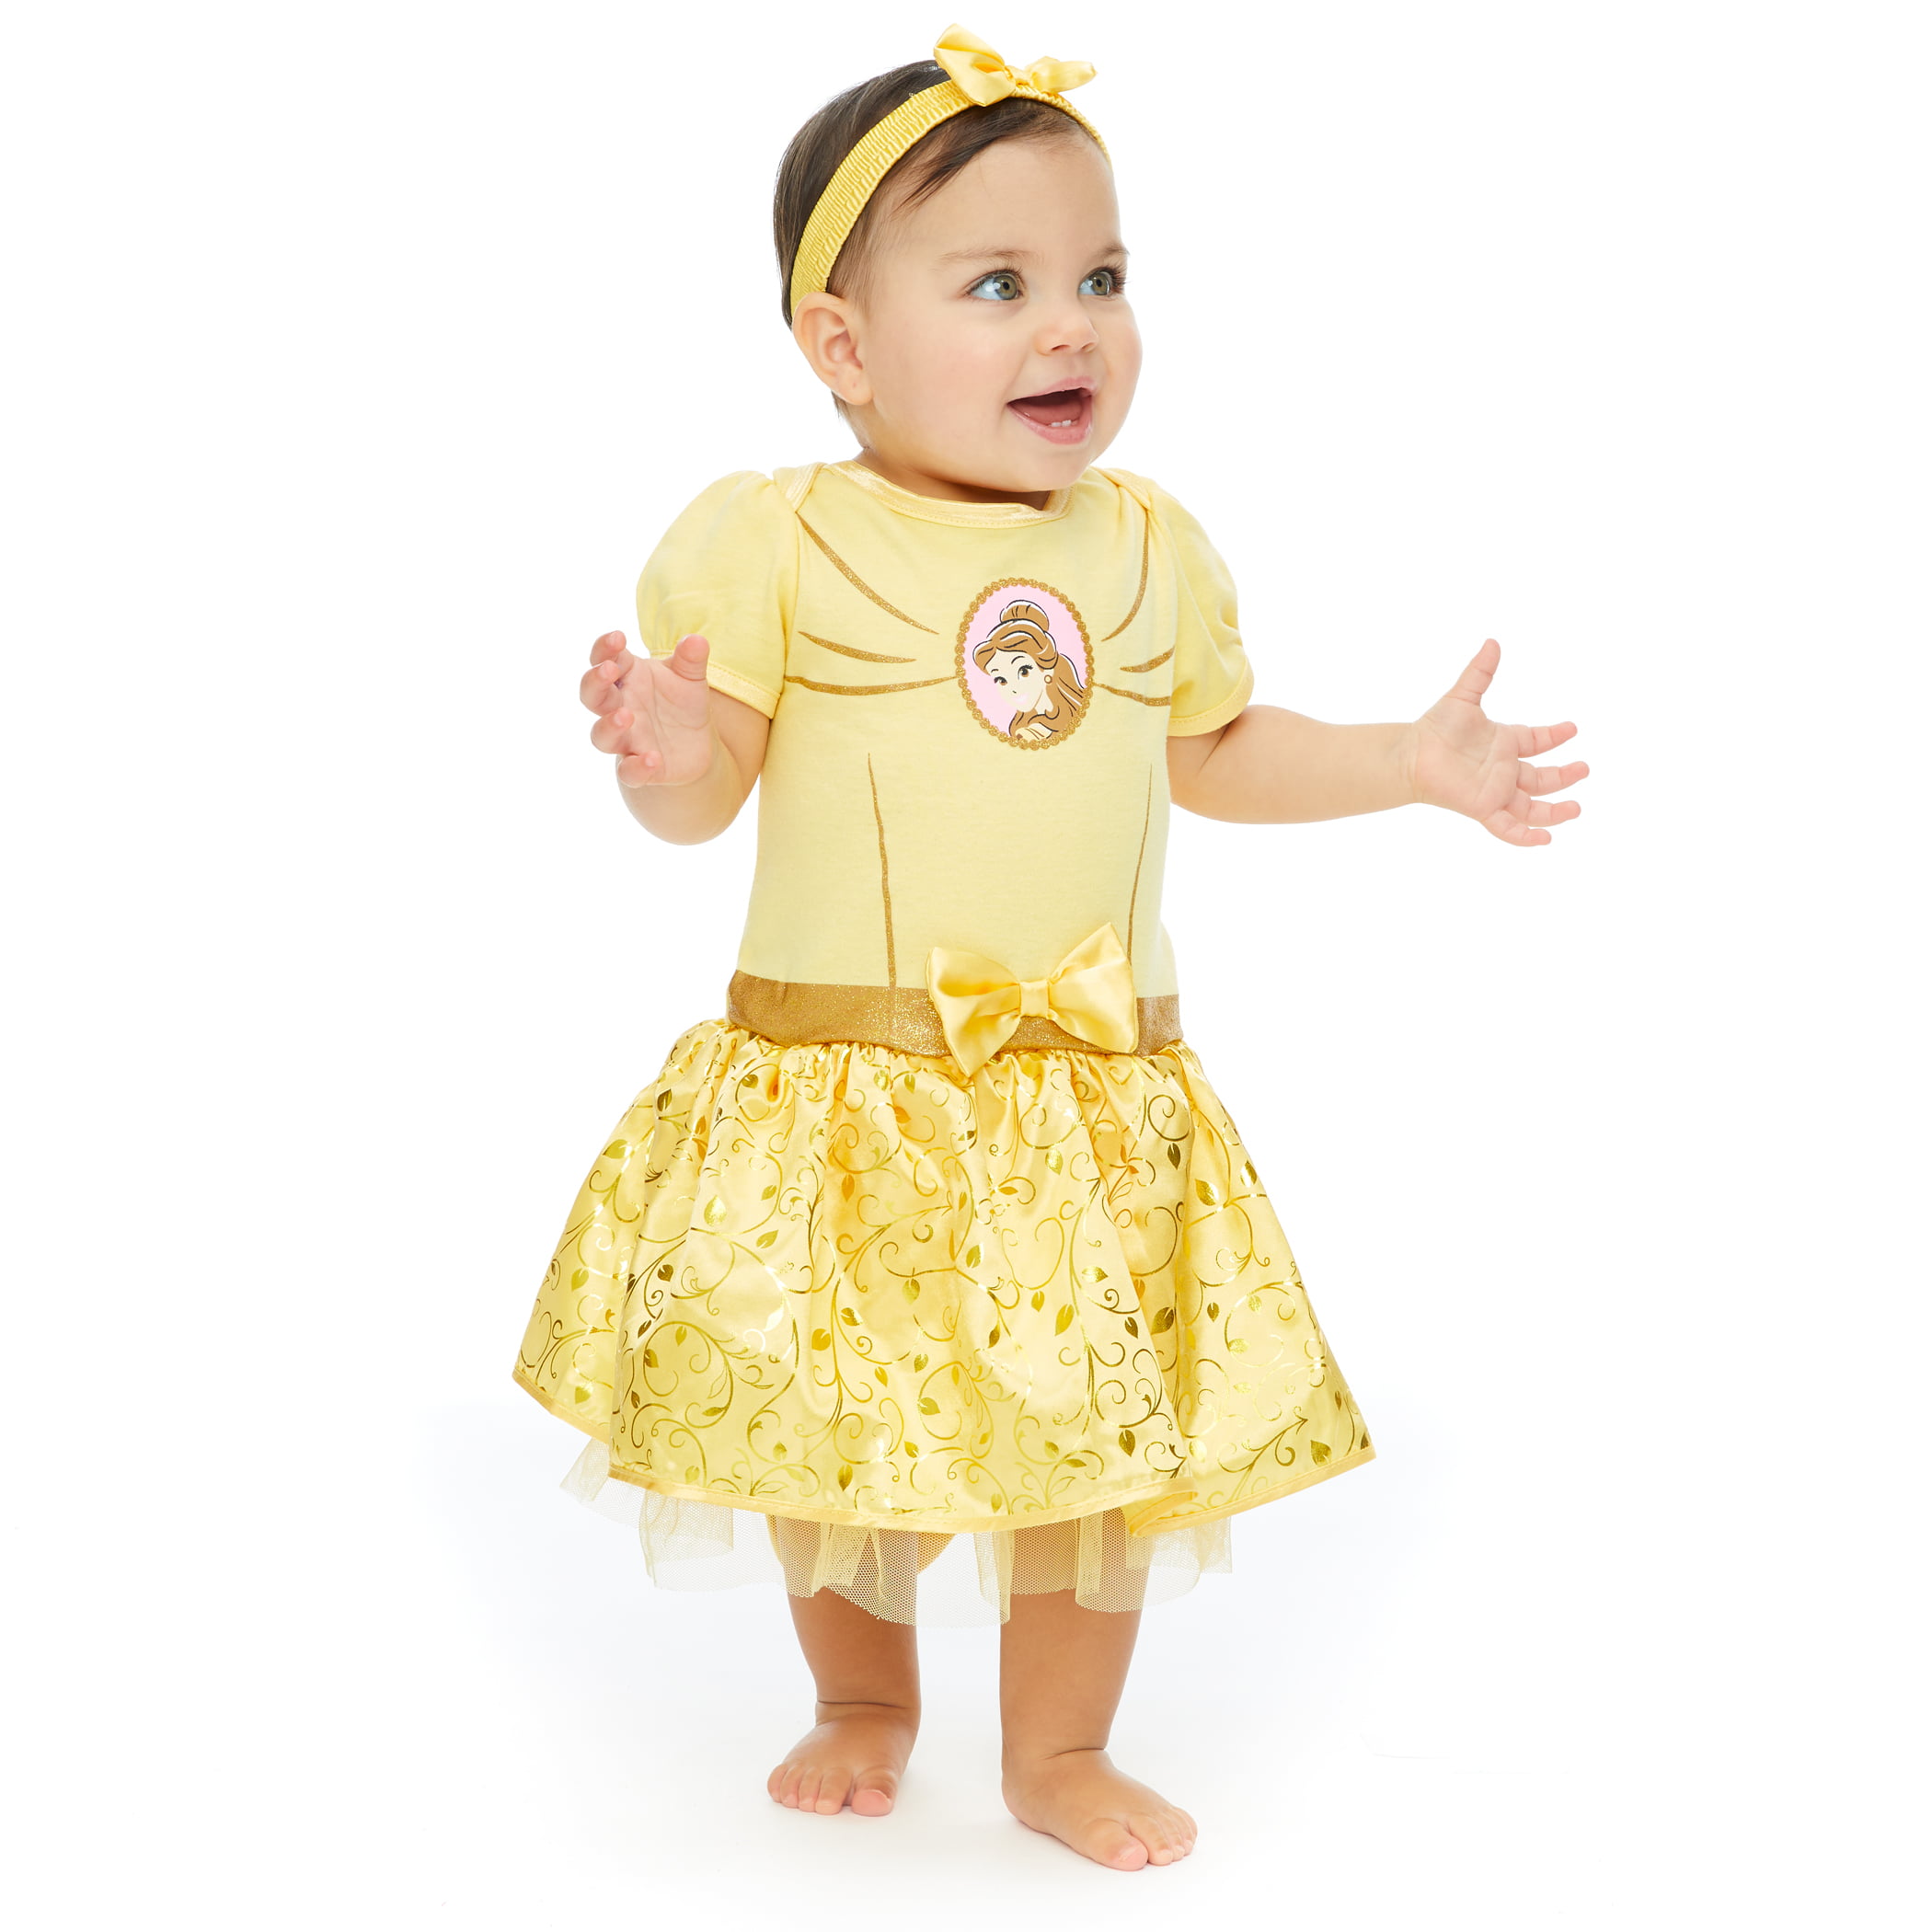 Princess Belle Beauty and the Beast Newborn Baby Dress Infant Cotton Clothes 